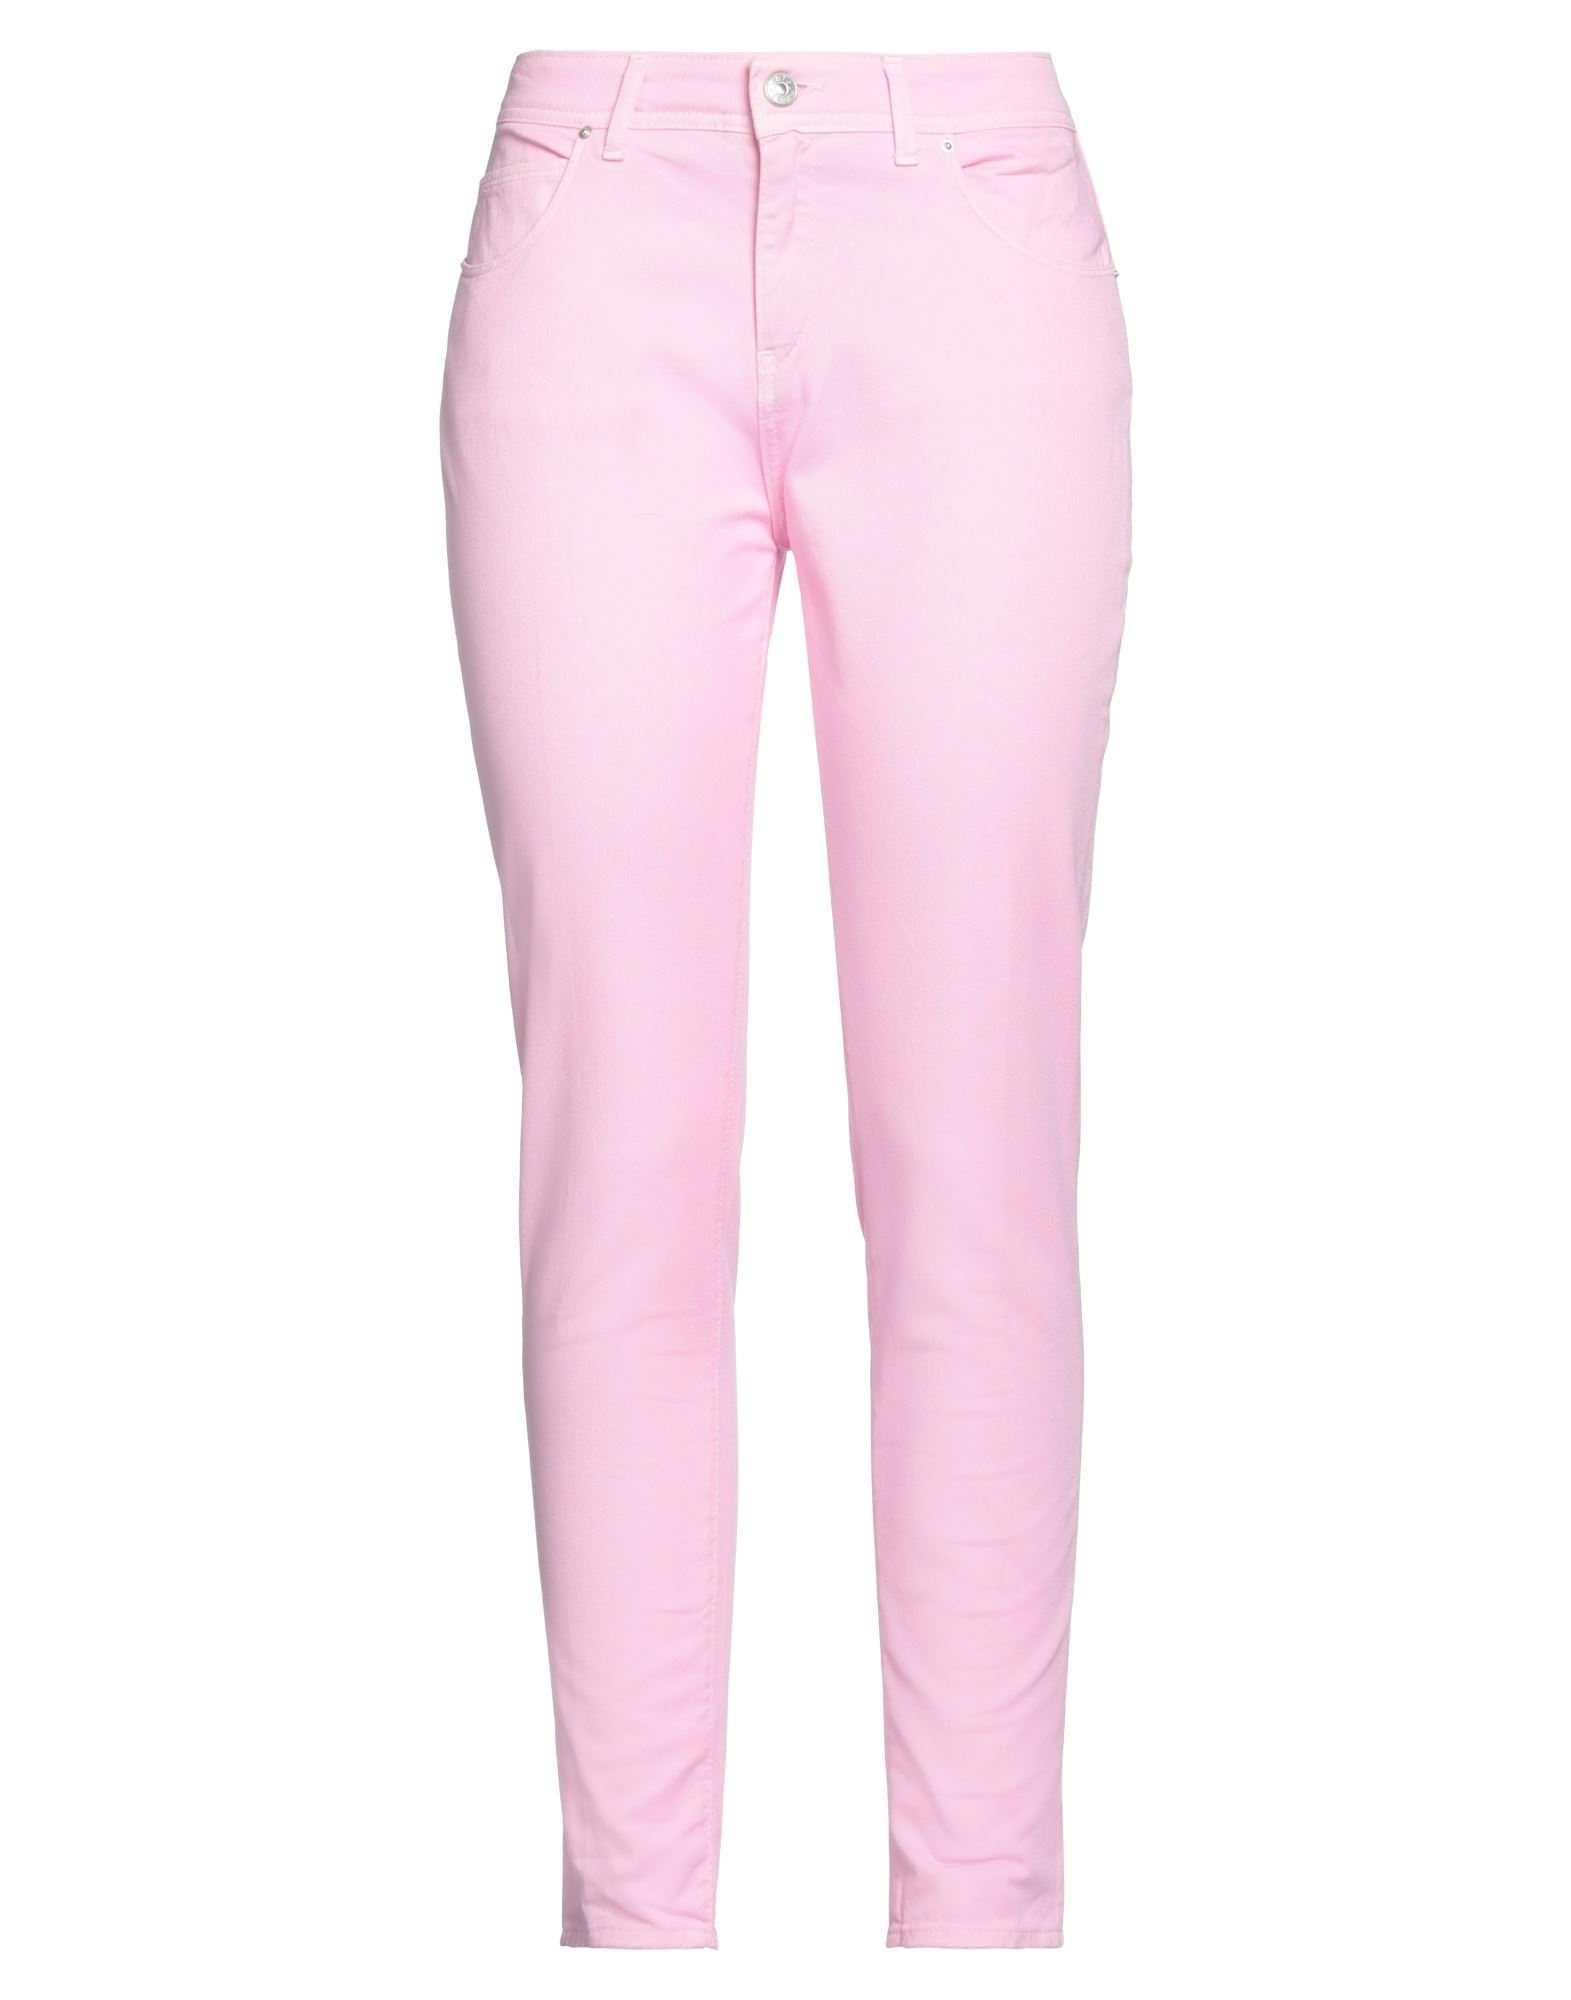 Noir And Bleu Jeans In Pink